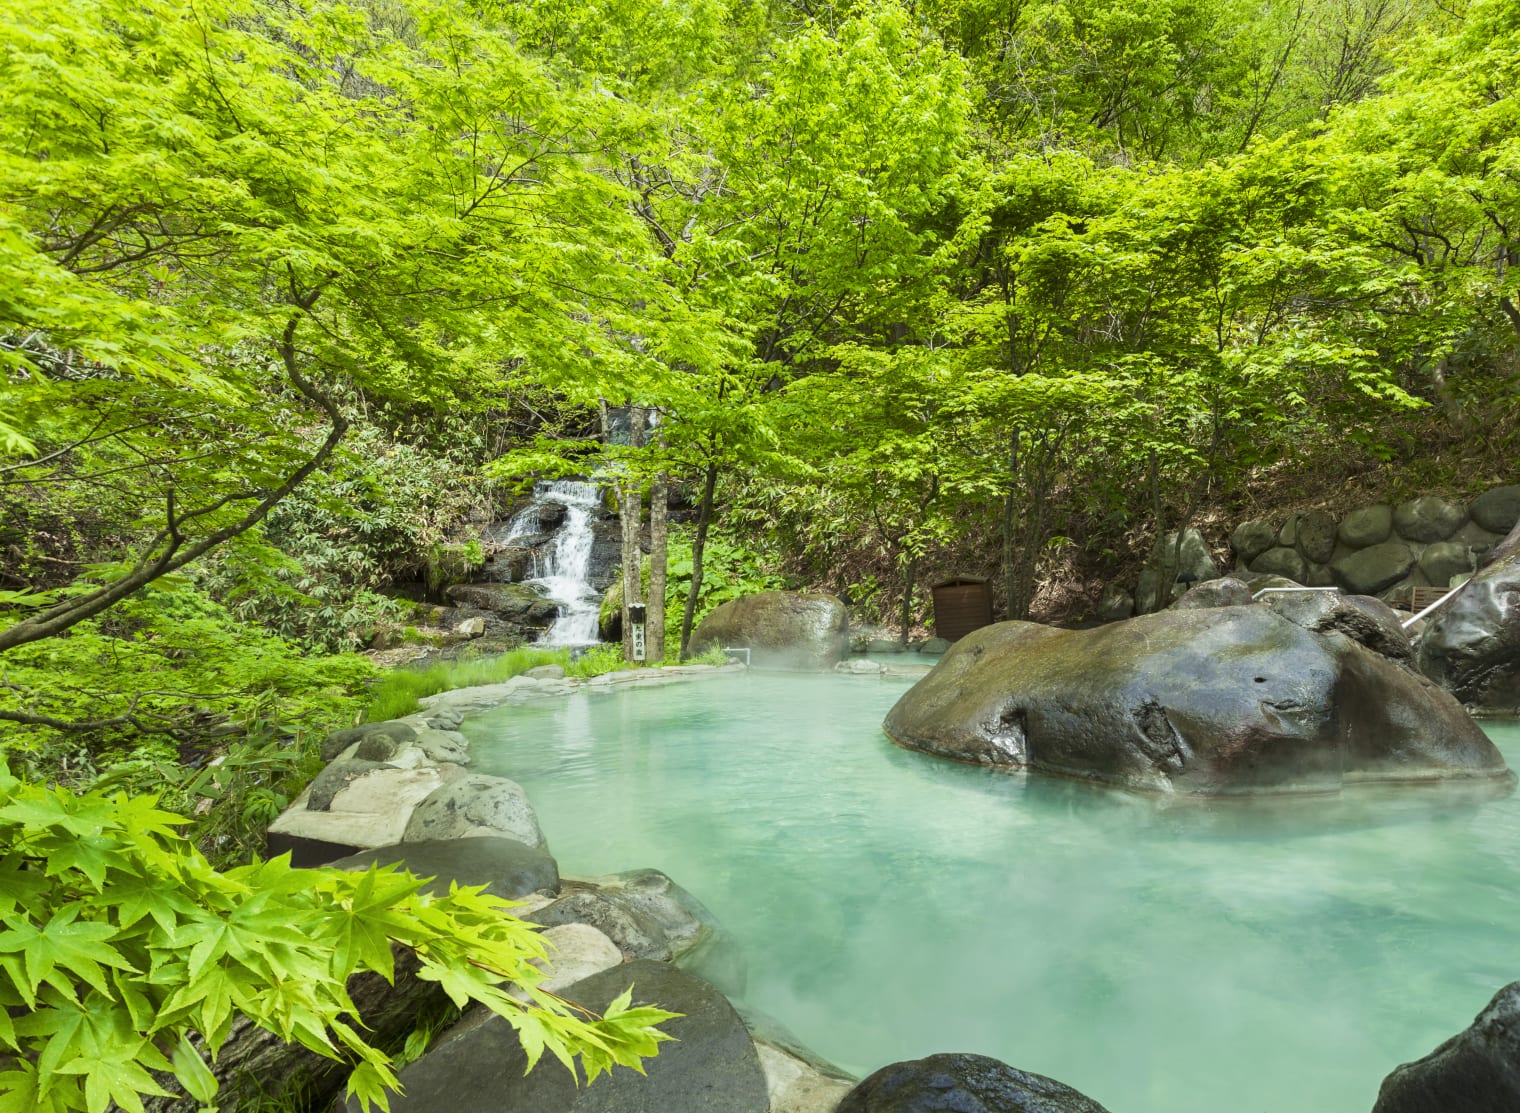 Oirase Keiryu Onsen Experience the Benefits of Natural Hot Springs